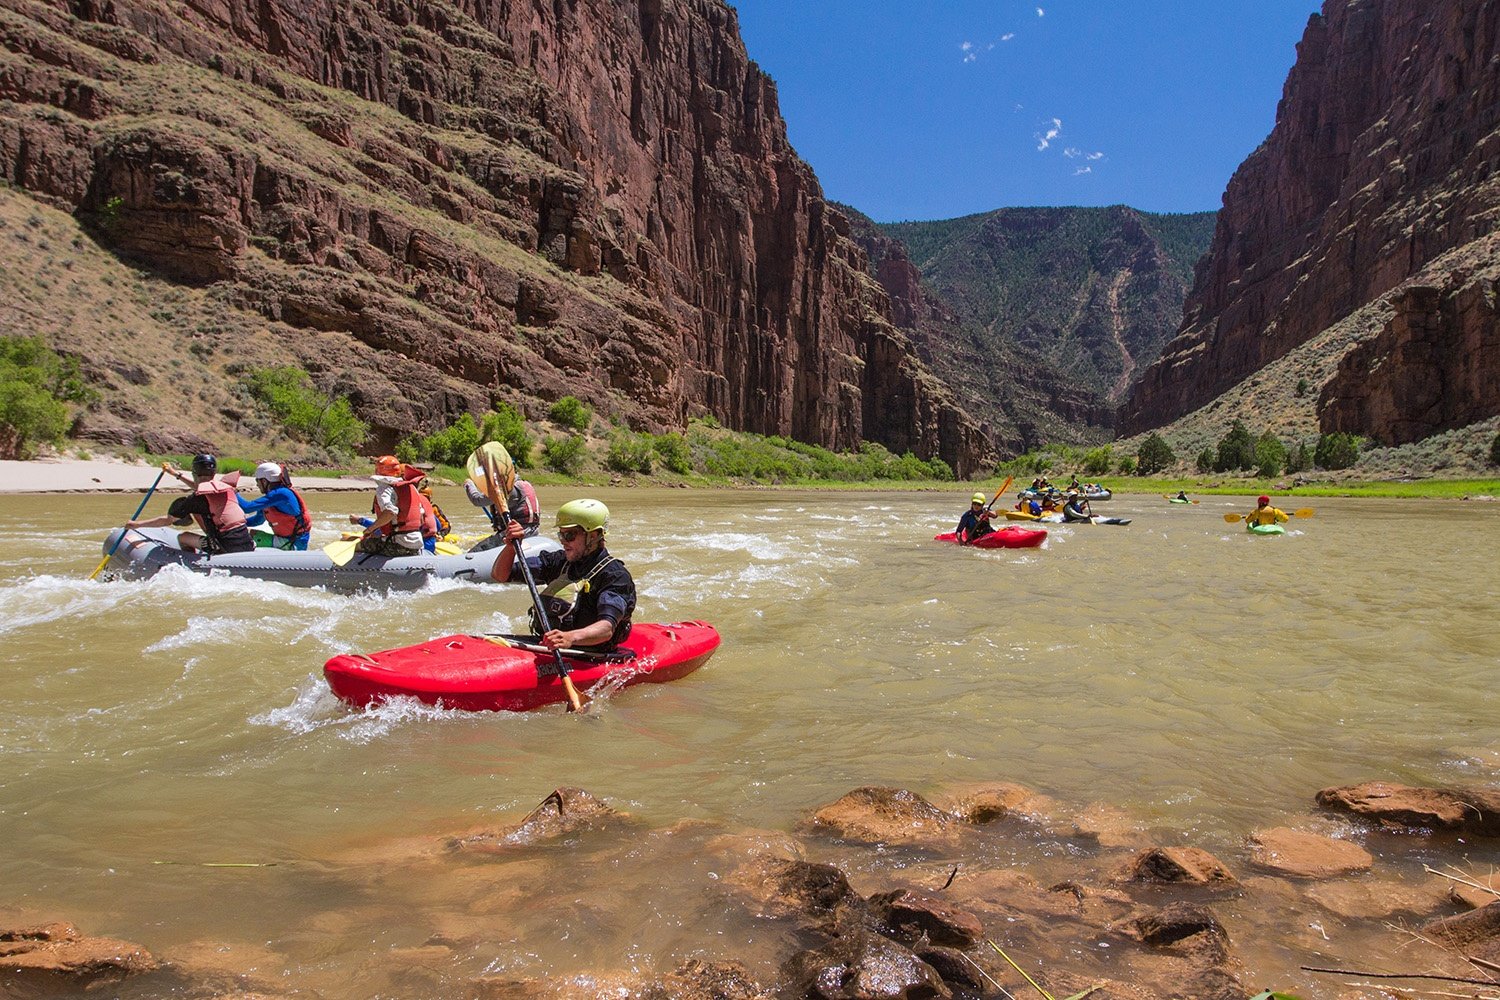 Students raft down a river in a desert canyon